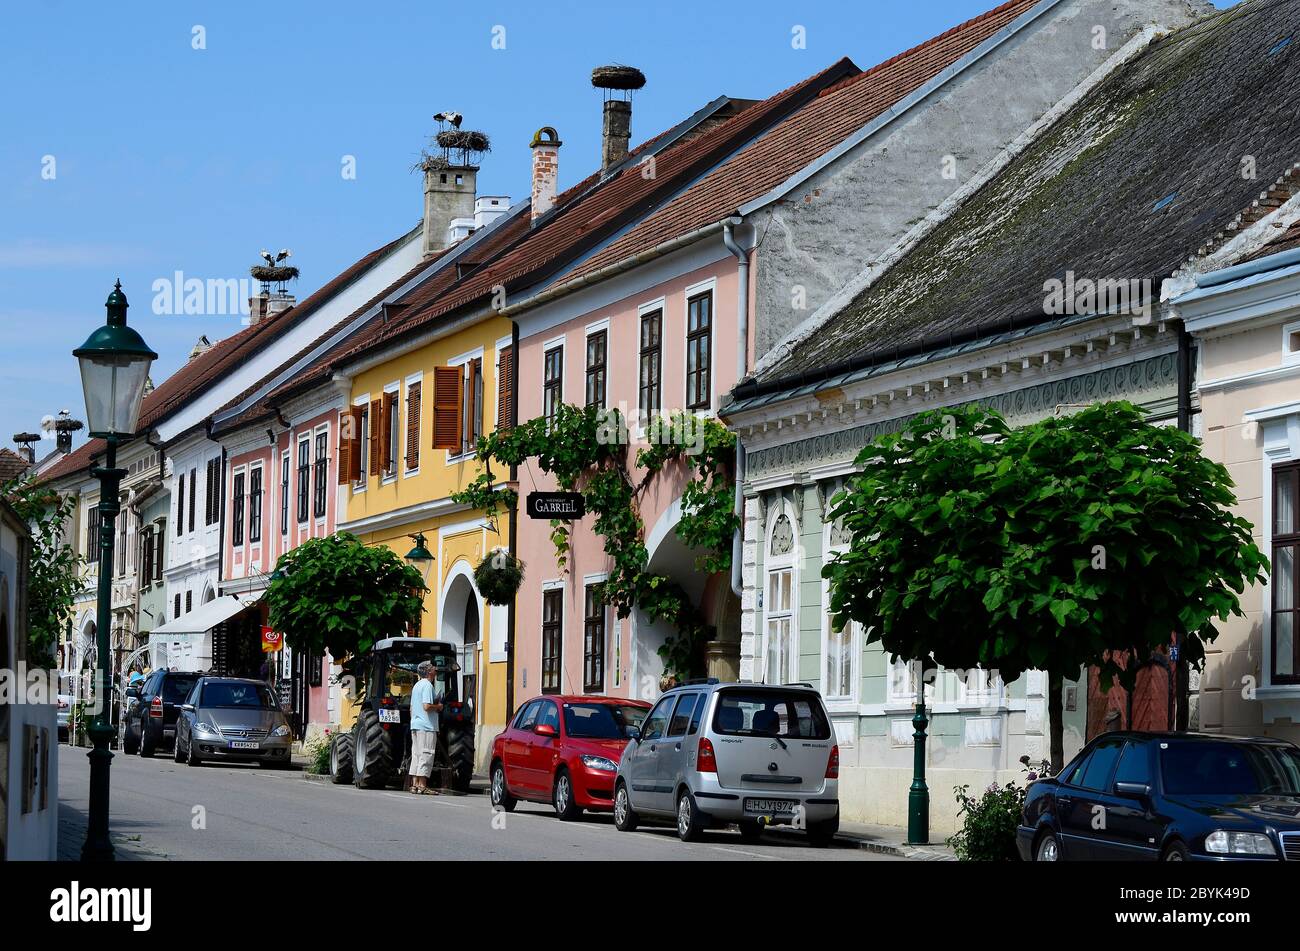 Rust, Austria - July 23rd 2012: different bird nests with white storks on roofs in the village Rust on Neusiedler Lake in Burgenland, this area is kno Stock Photo